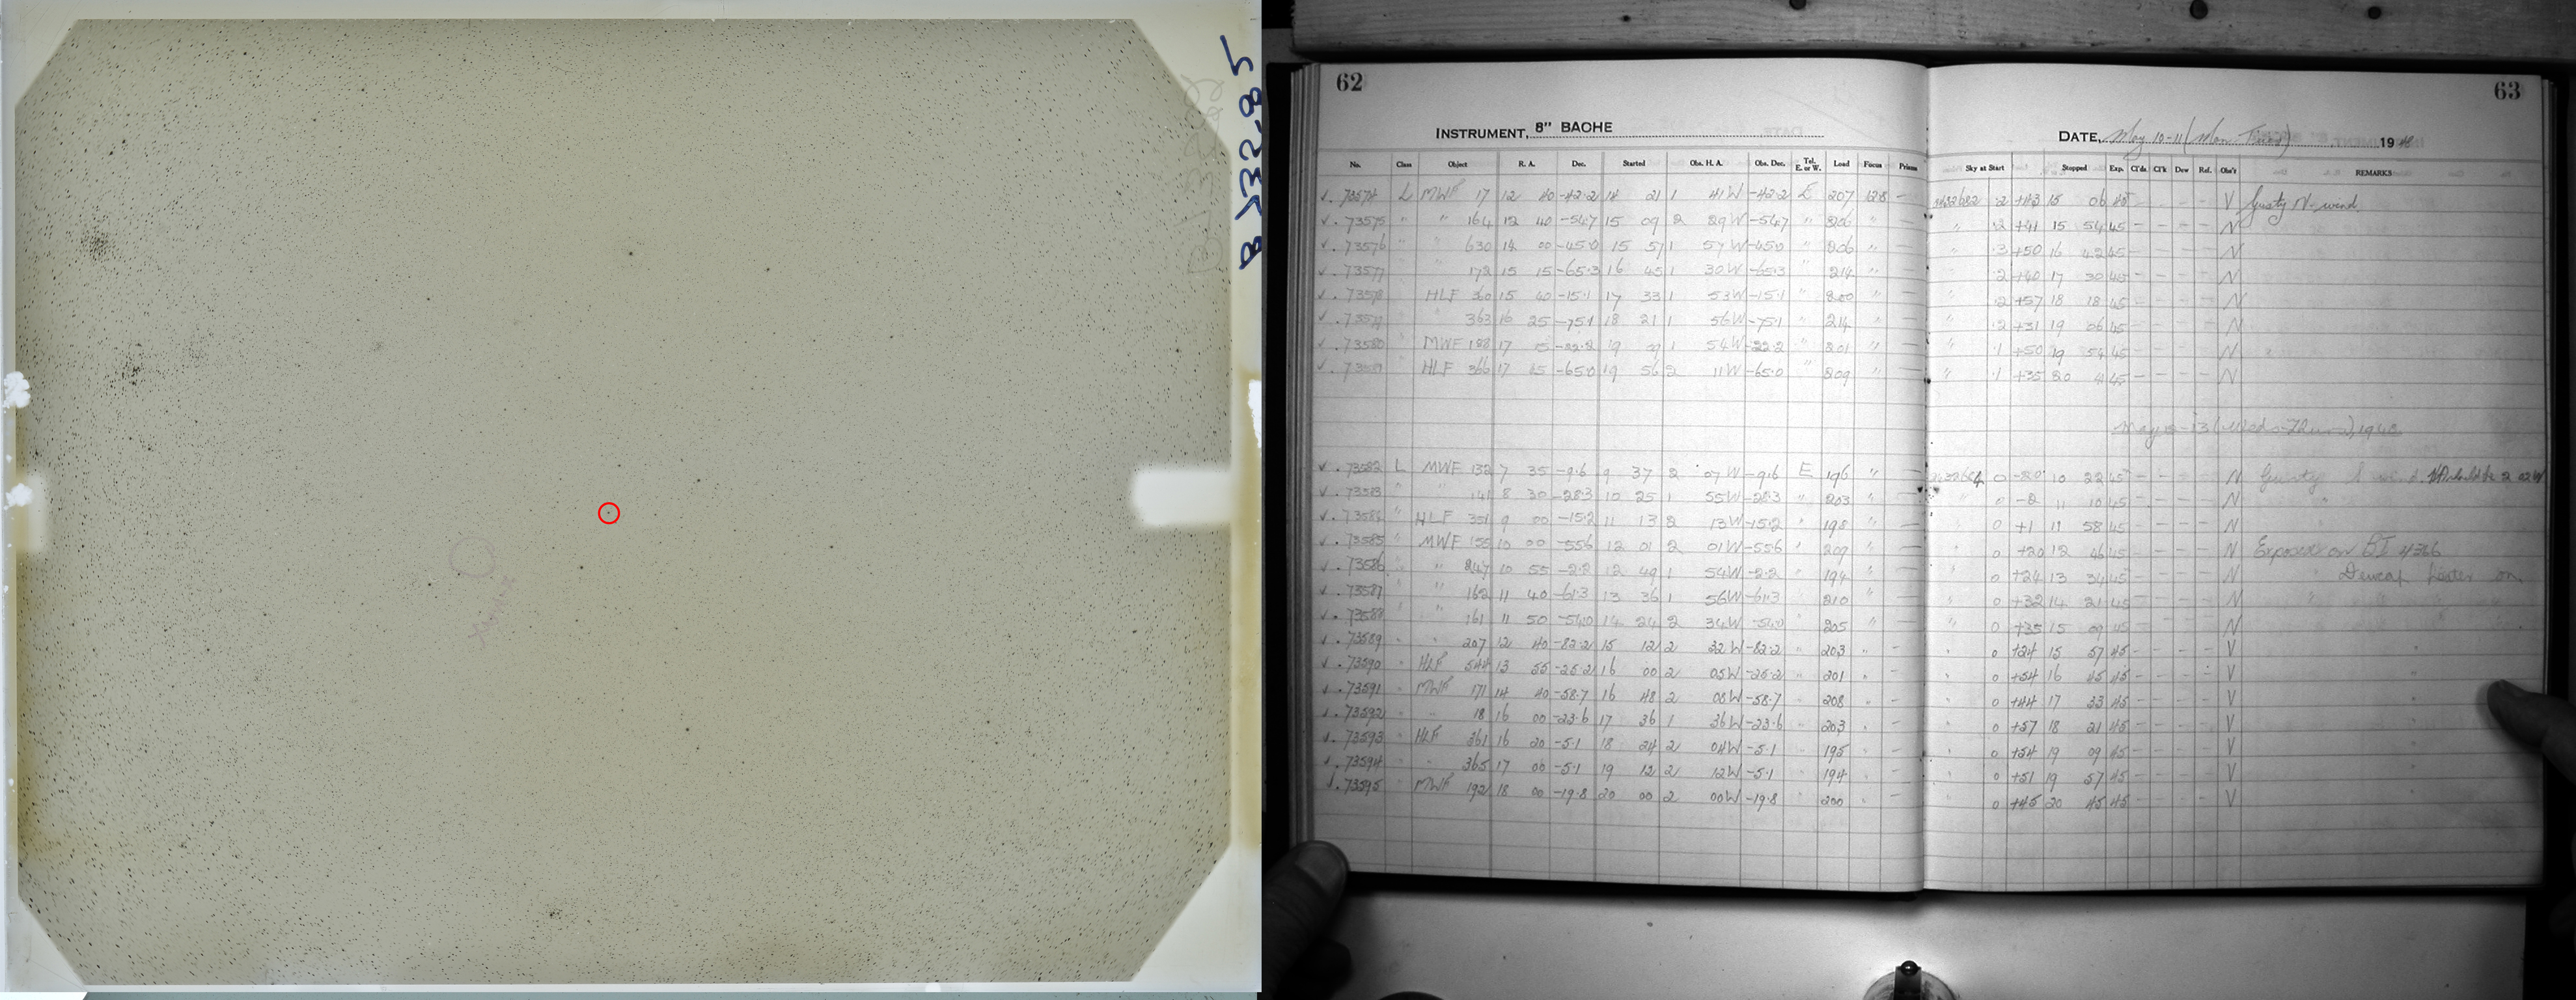 Left: A glass photographic plate with U Mon circled in the center. Right: A log book with the corresponding entry for the plate